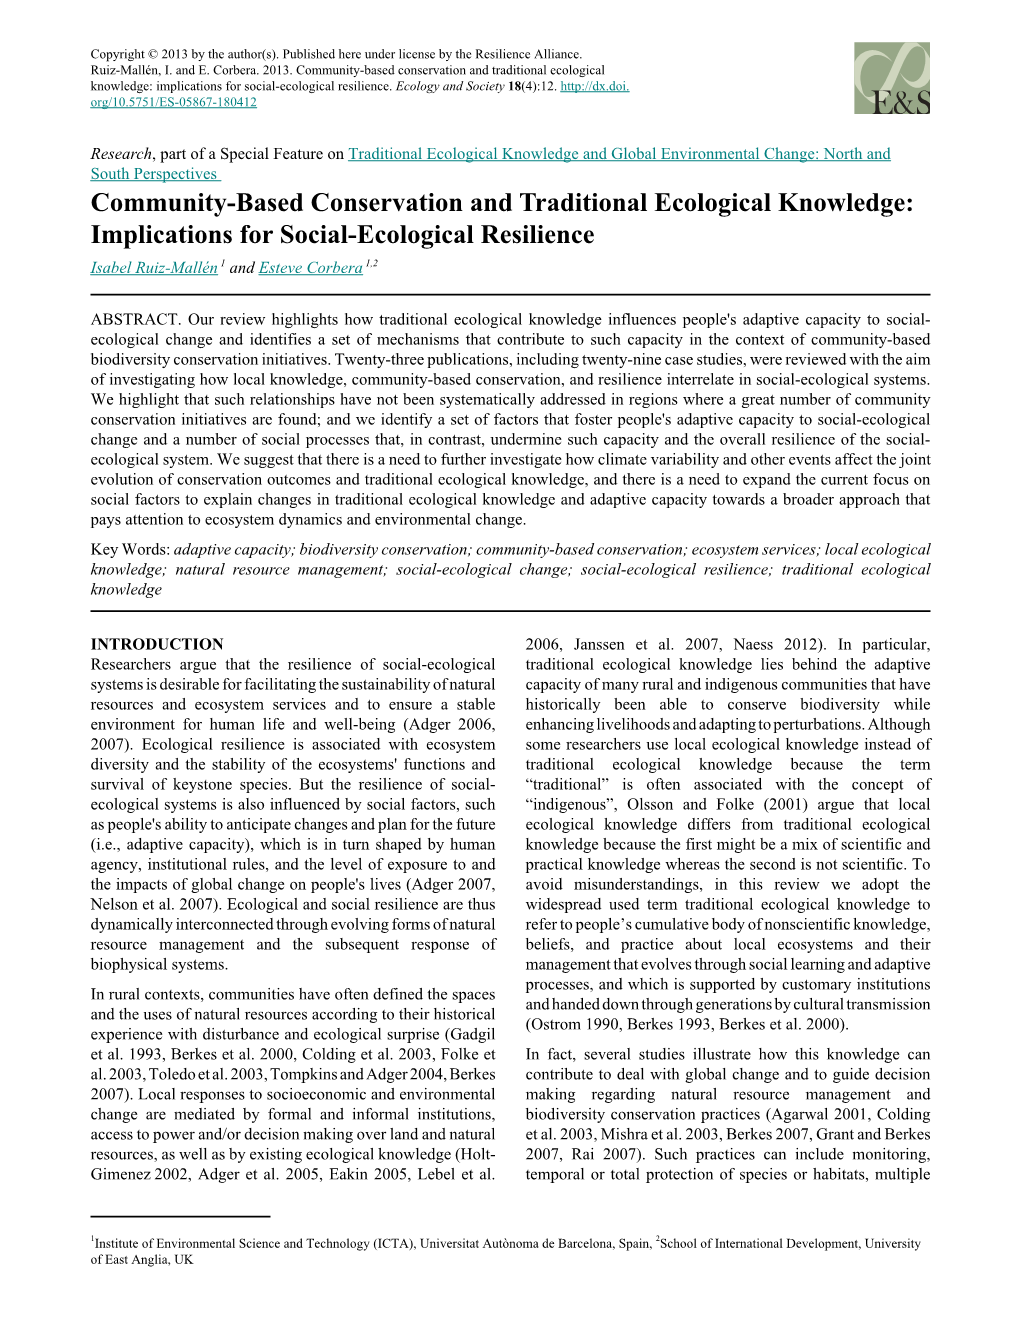 Community-Based Conservation and Traditional Ecological Knowledge: Implications for Social-Ecological Resilience